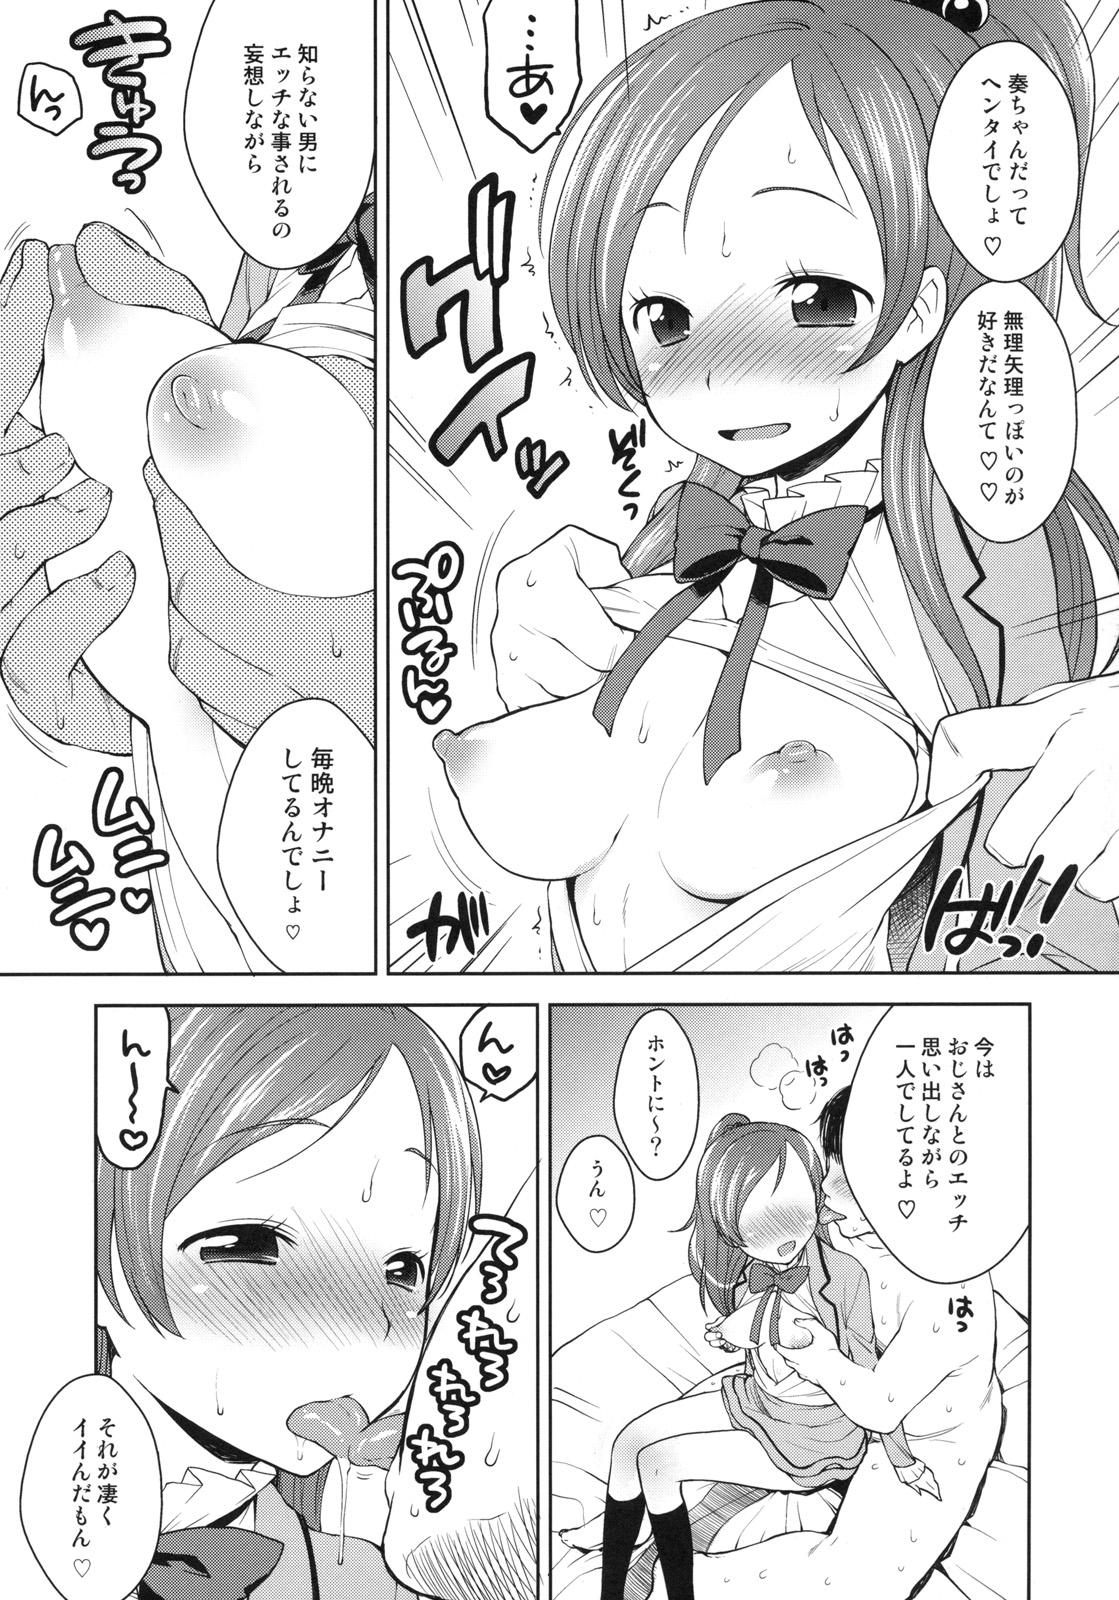 Strapon Sweet Delivery - Suite precure Kink - Page 4